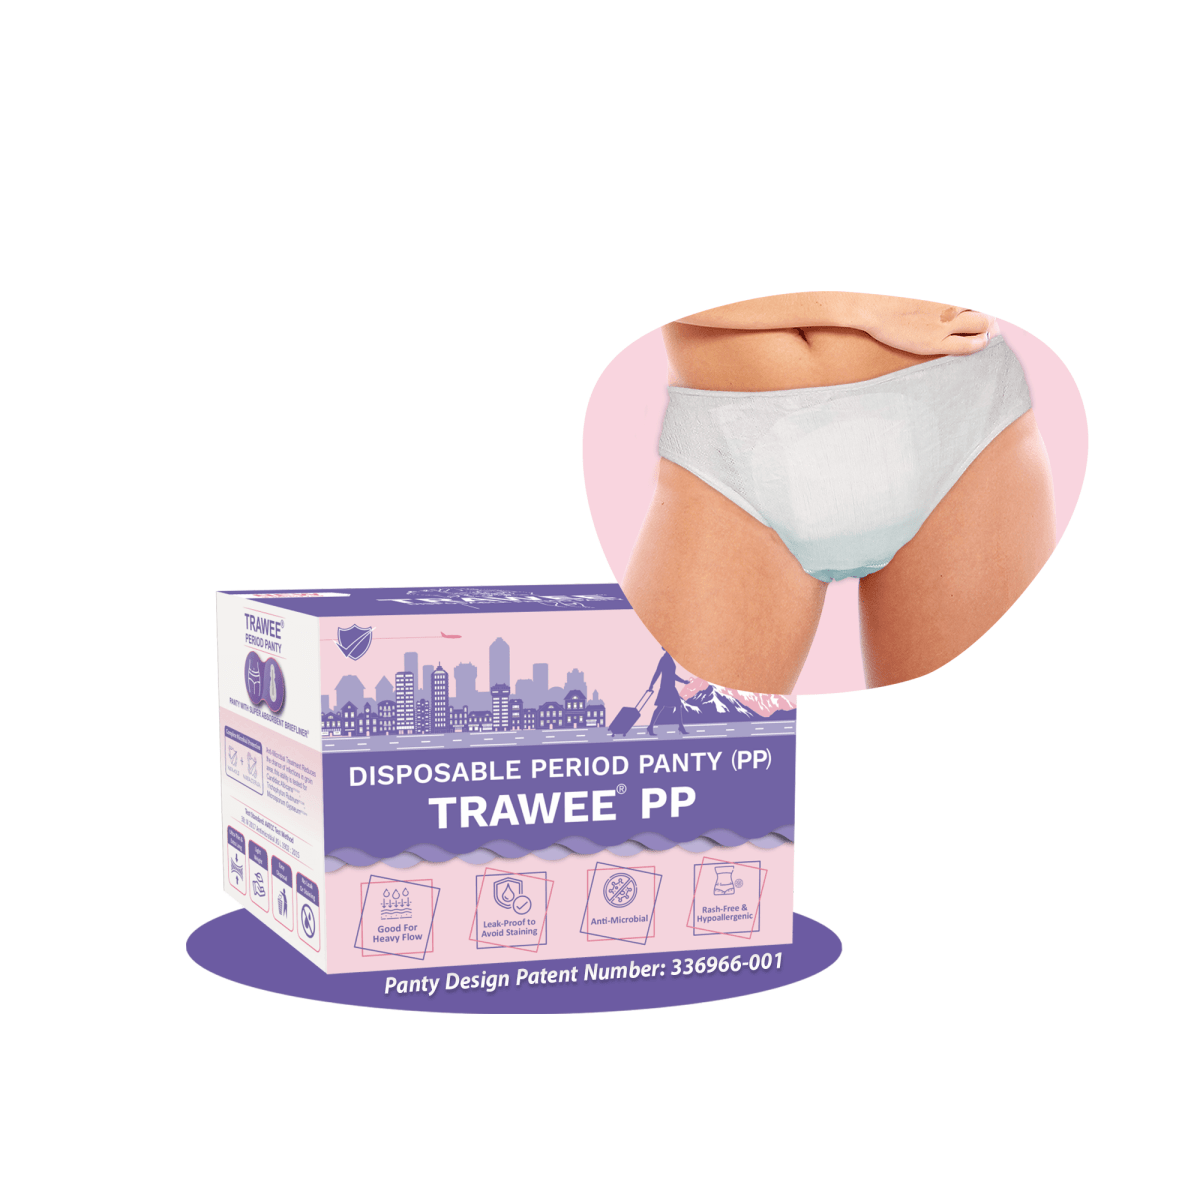 Trawee-PP Disposable Period Panty. High Absorbance for Medium-Heavy flow days. - TF012A-0XS